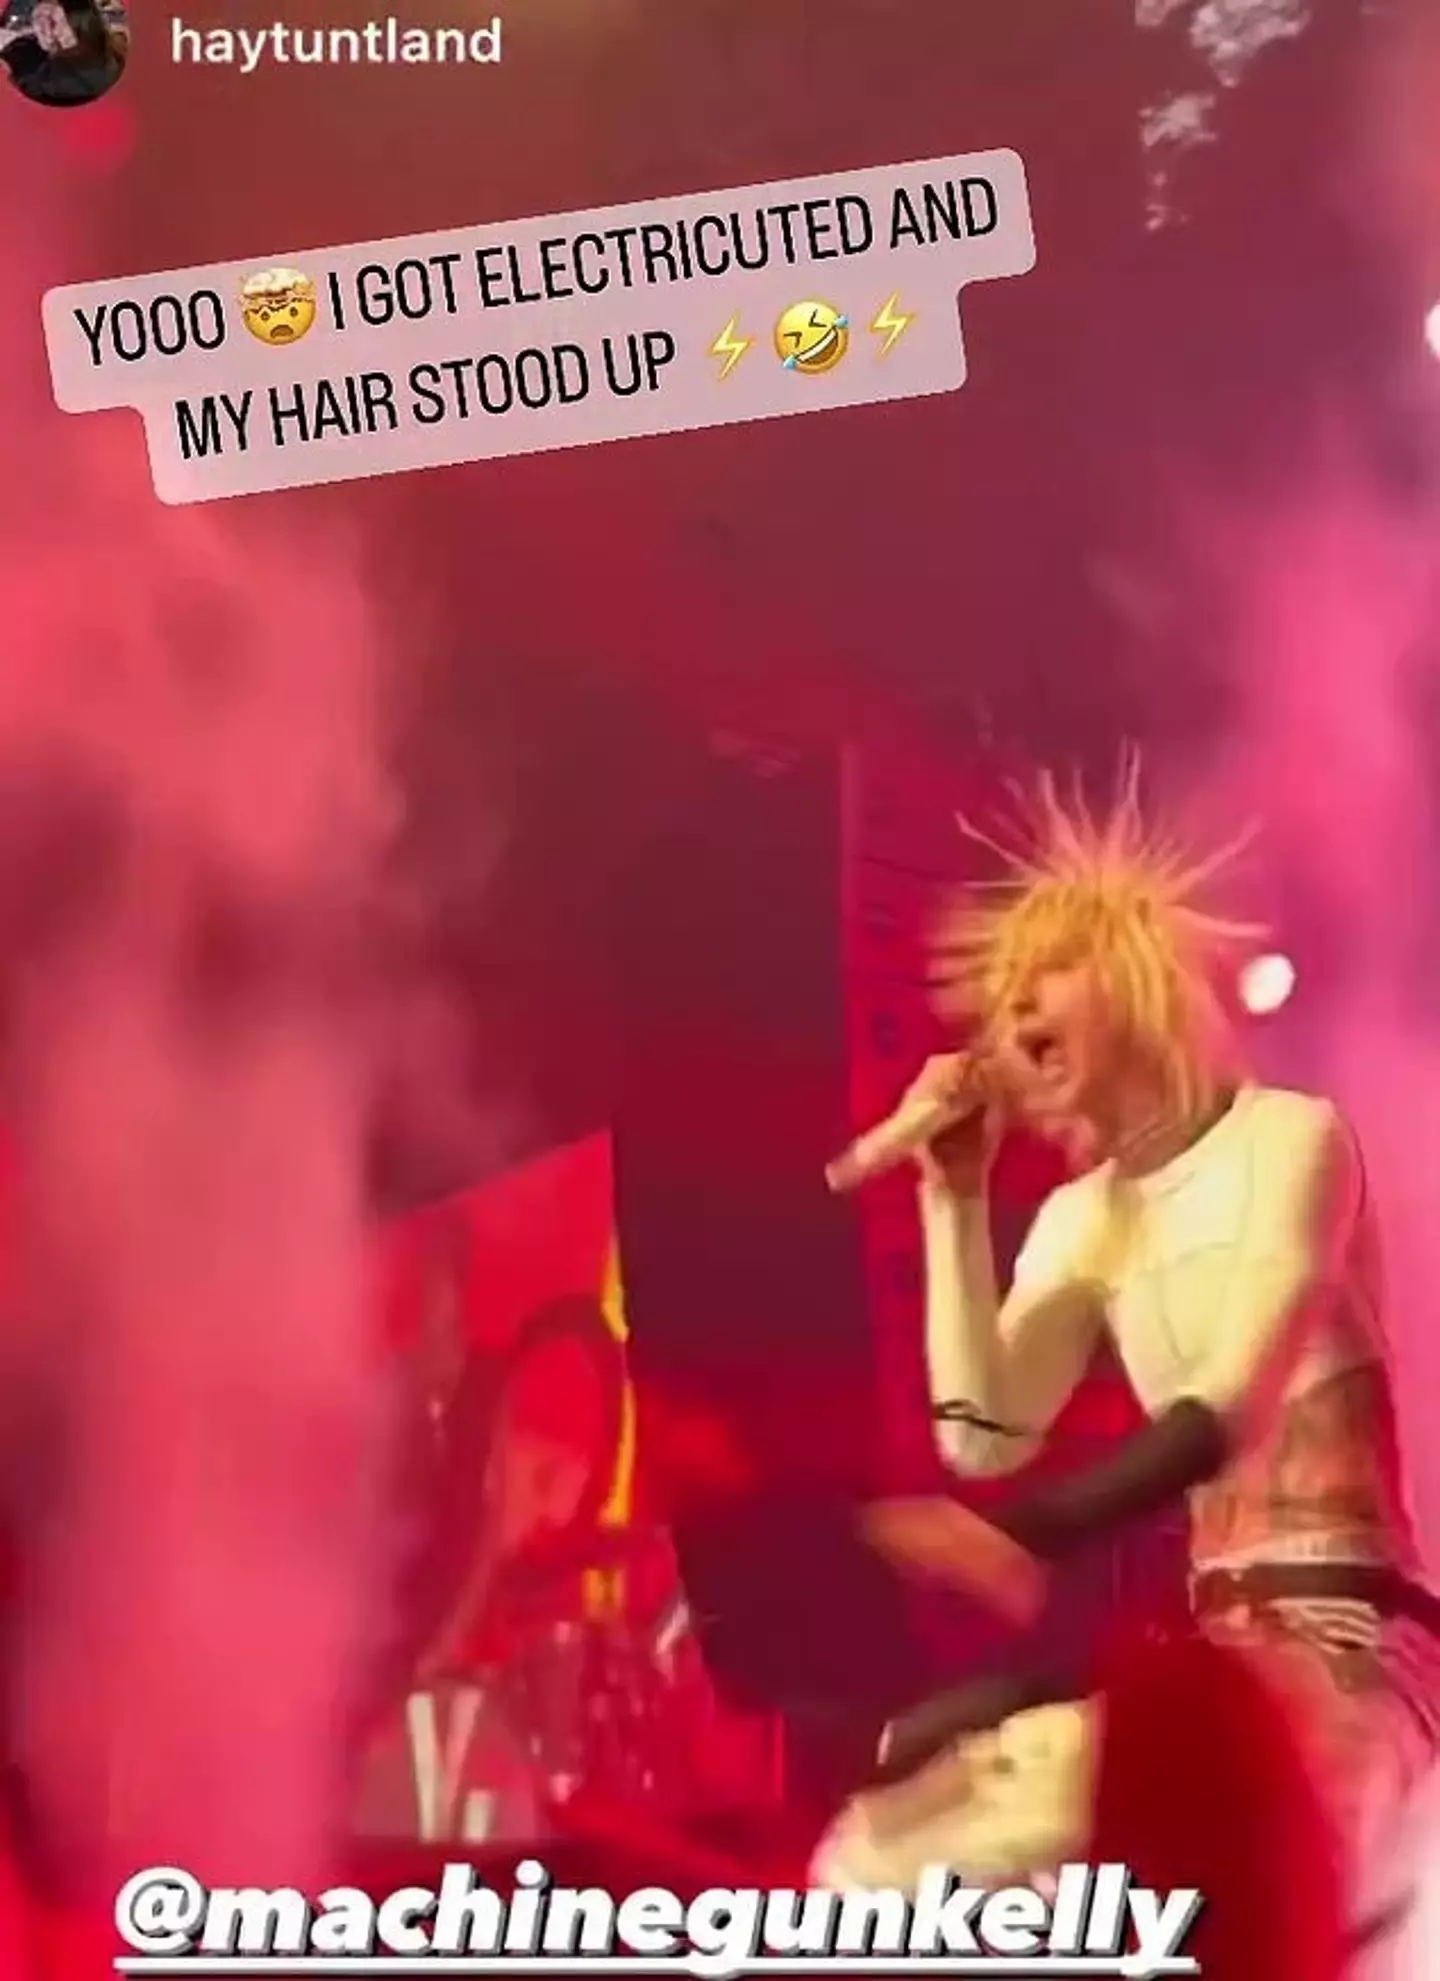 Taking to Instagram Stories, MGK shared a clip of the bizarre incident.